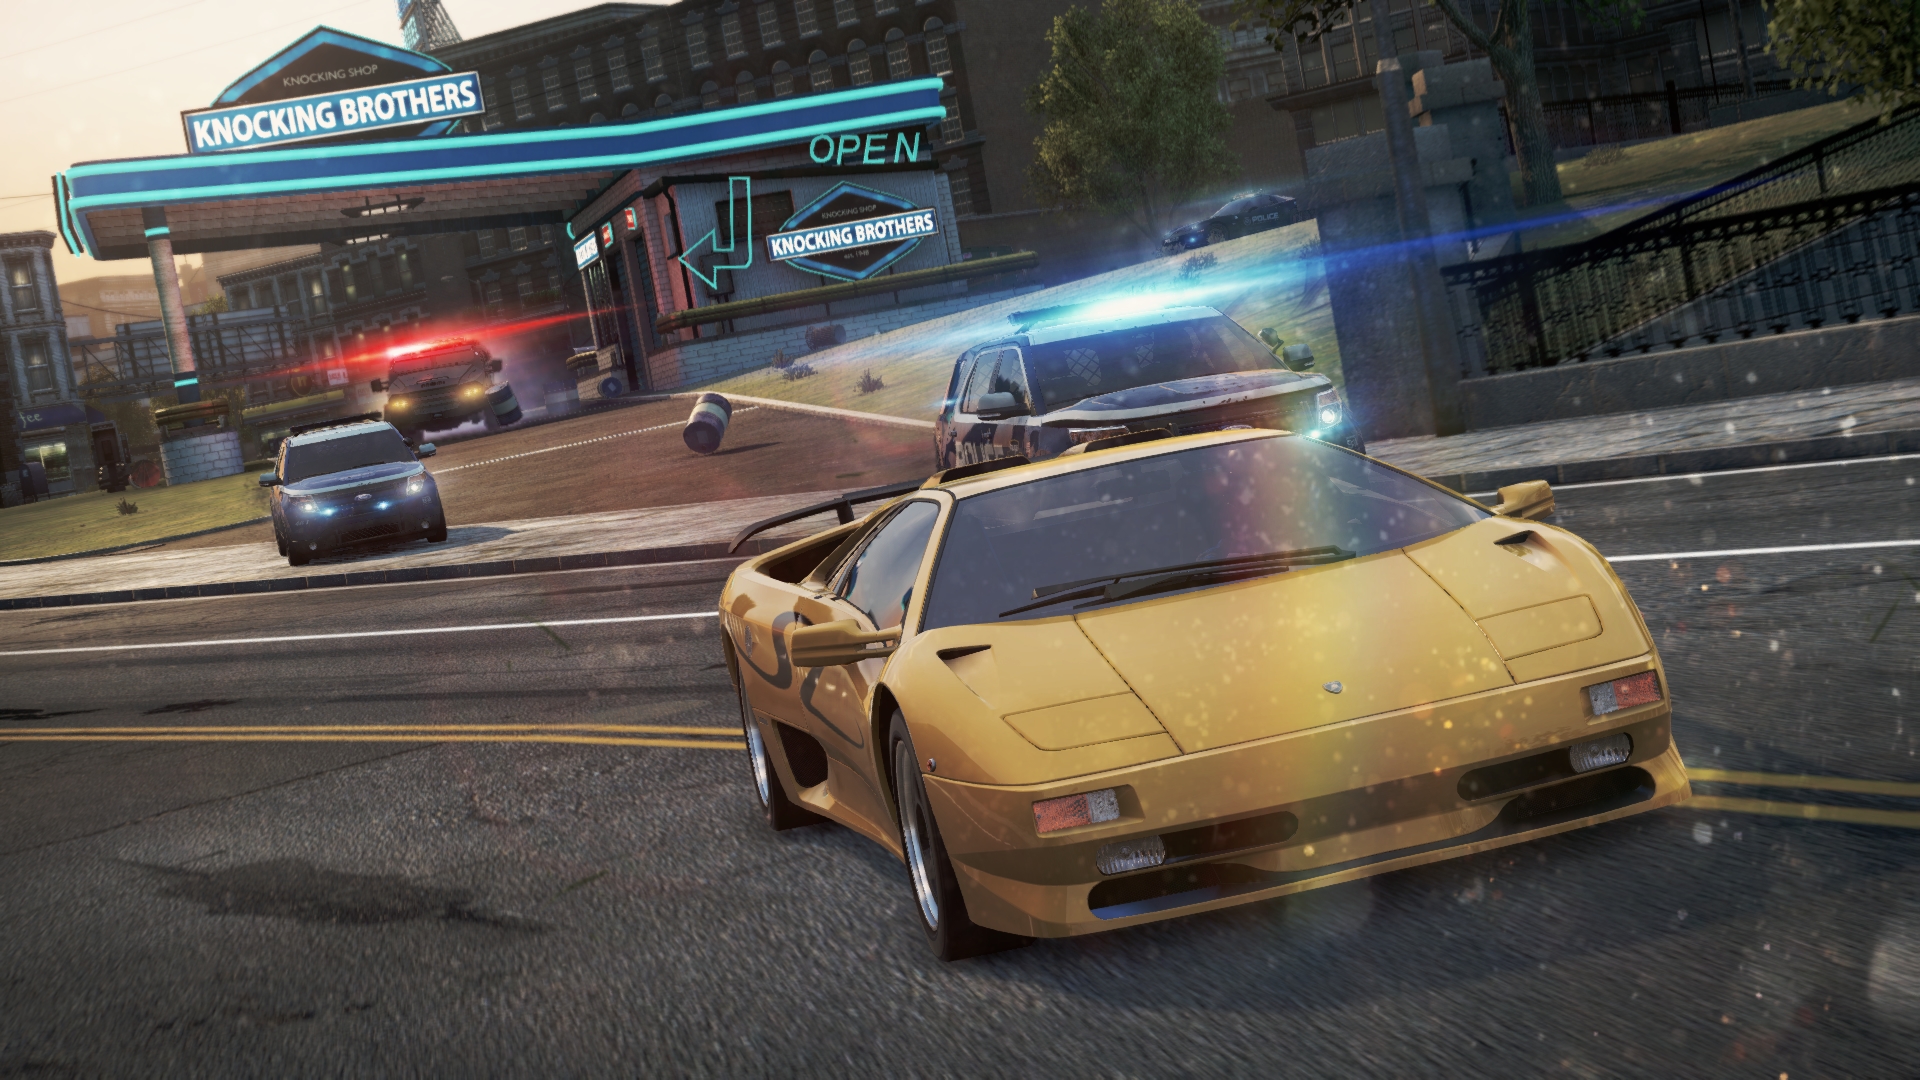 NFS most wanted-2